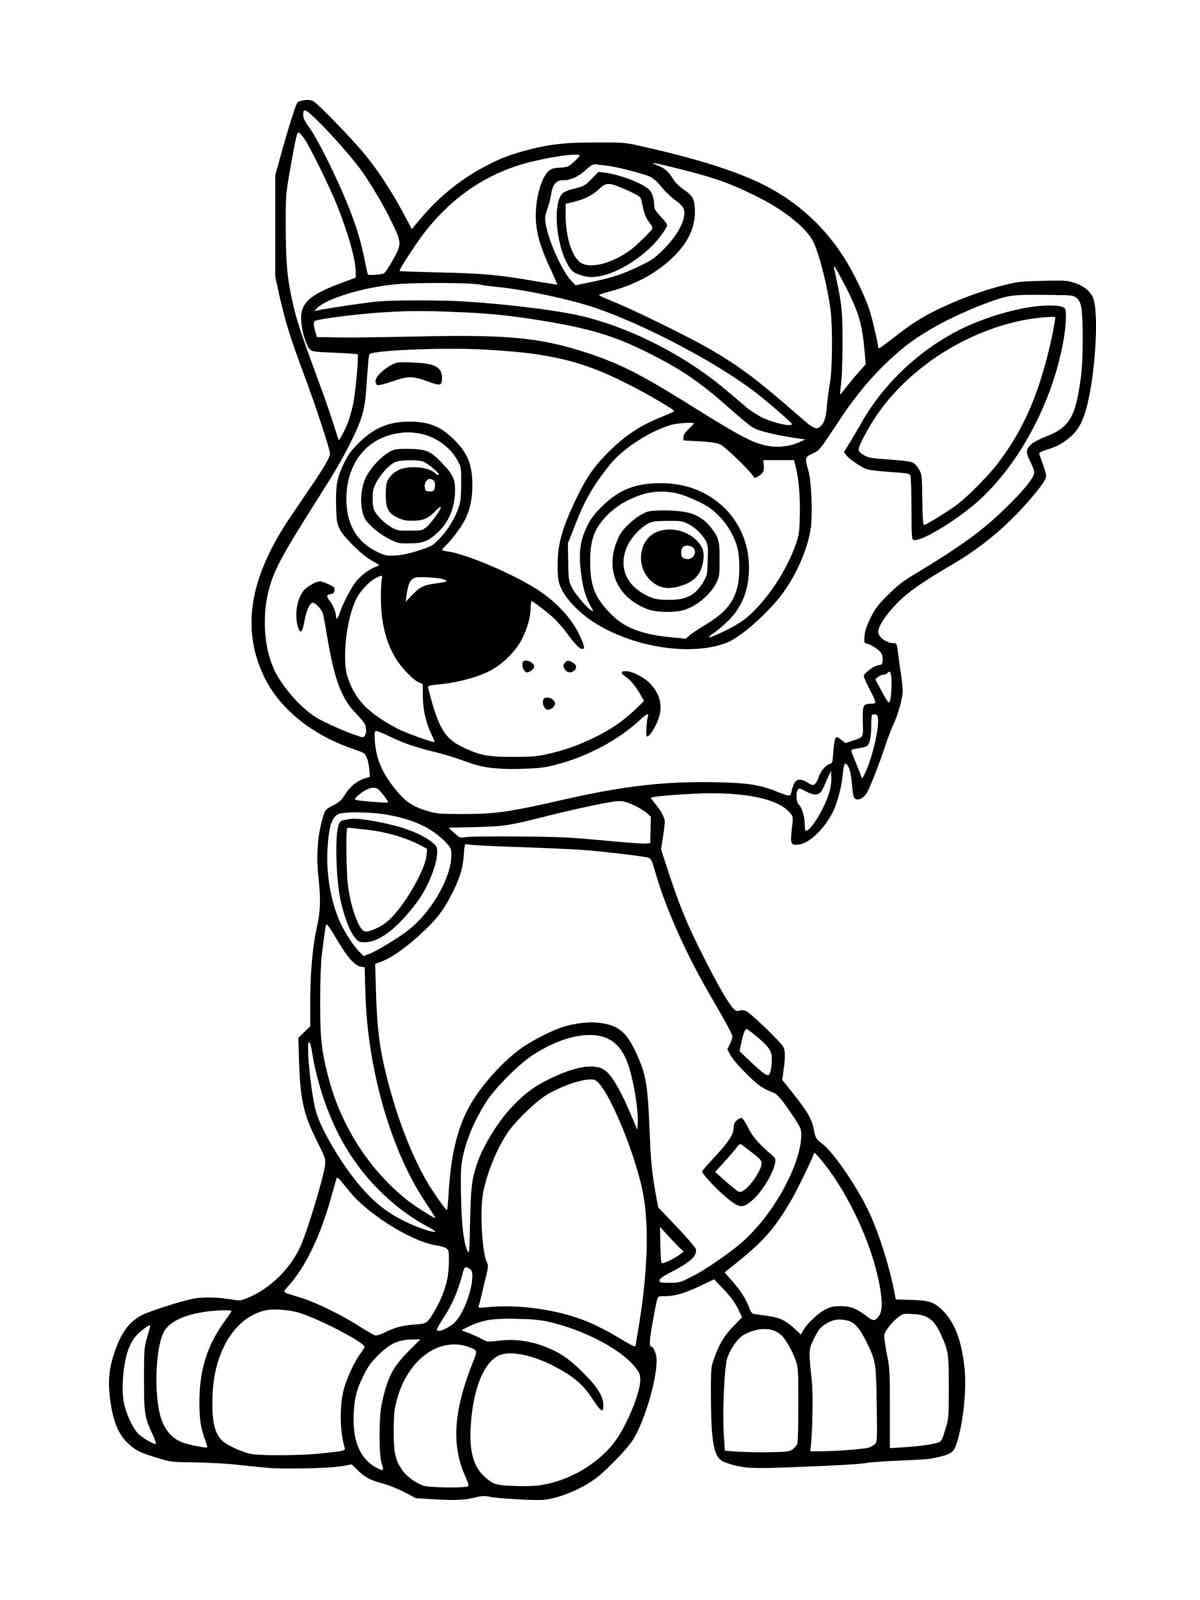 Rocky Pat Patrouille Souriant coloring page